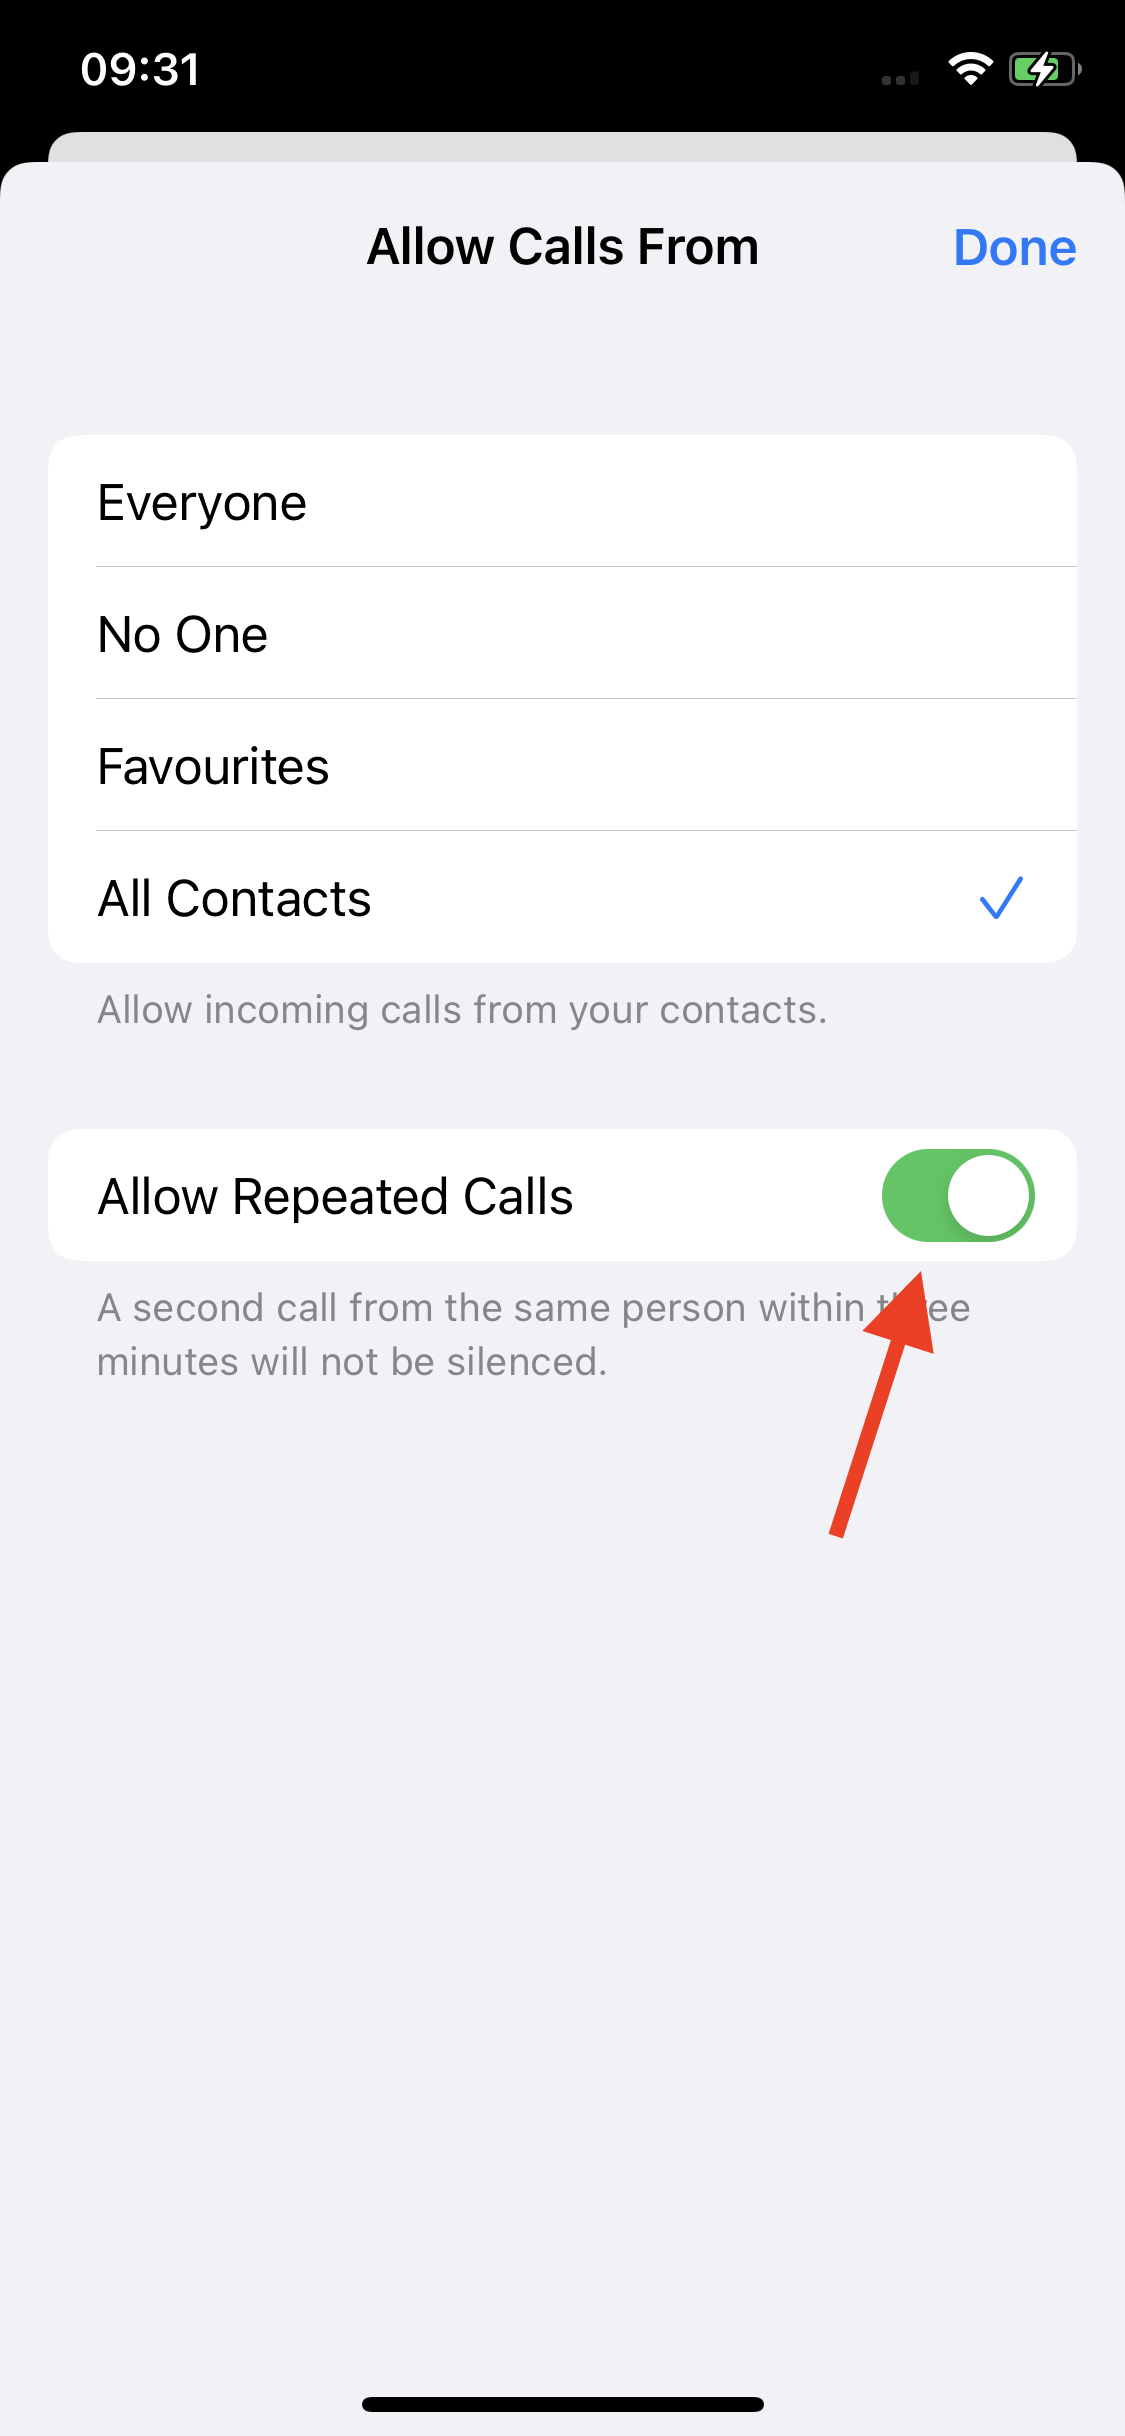 Toggle off ‘Allow Repeated Calls’